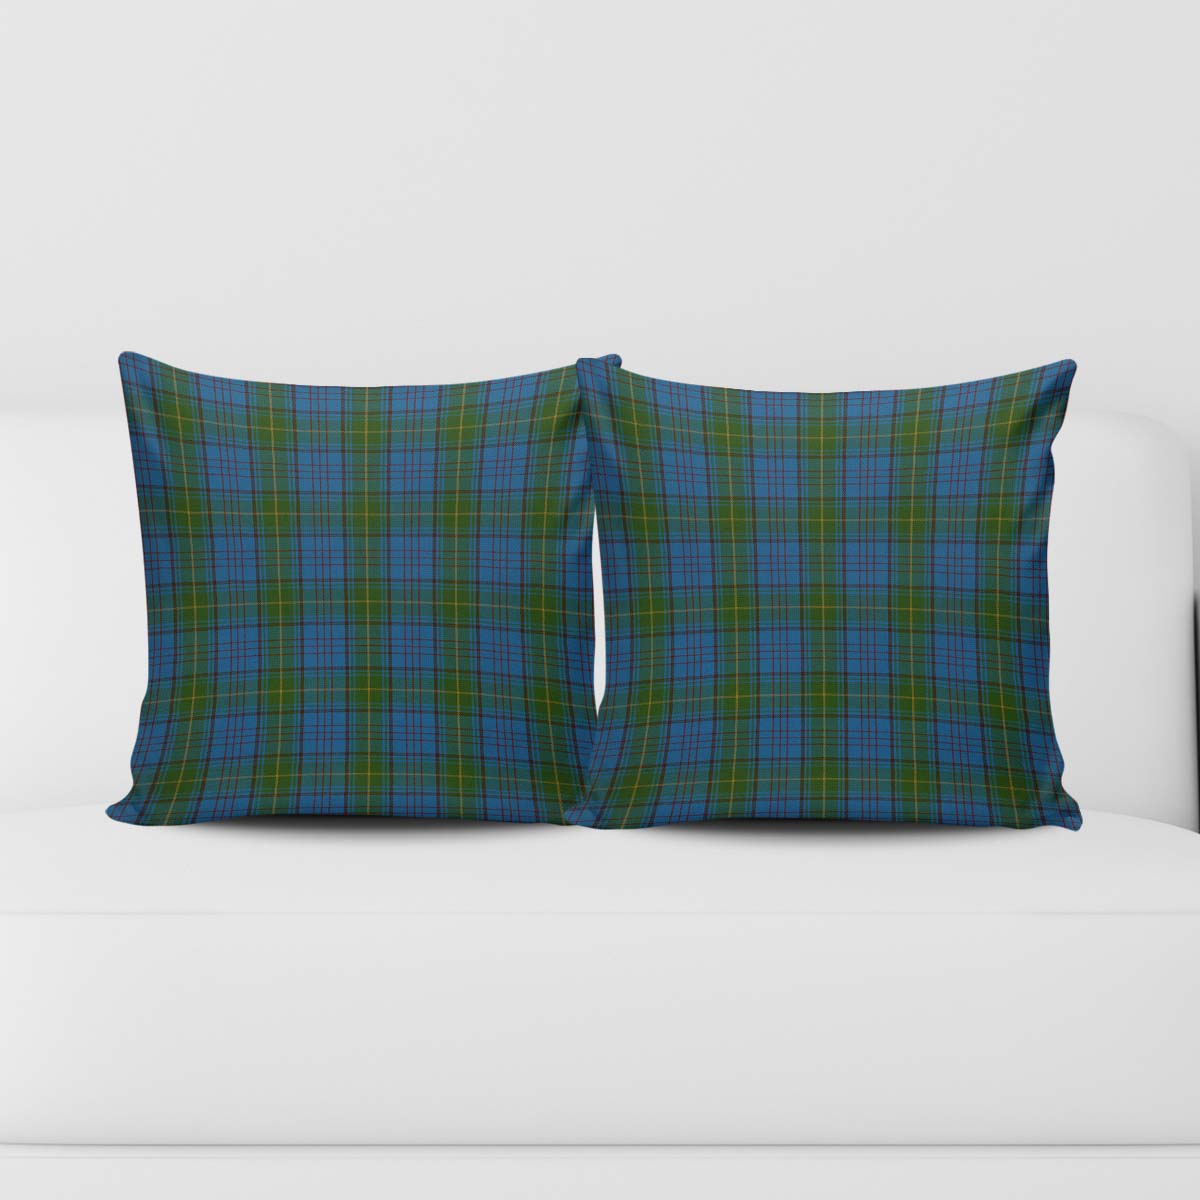 Donegal County Ireland Tartan Pillow Cover Square Pillow Cover - Tartanvibesclothing